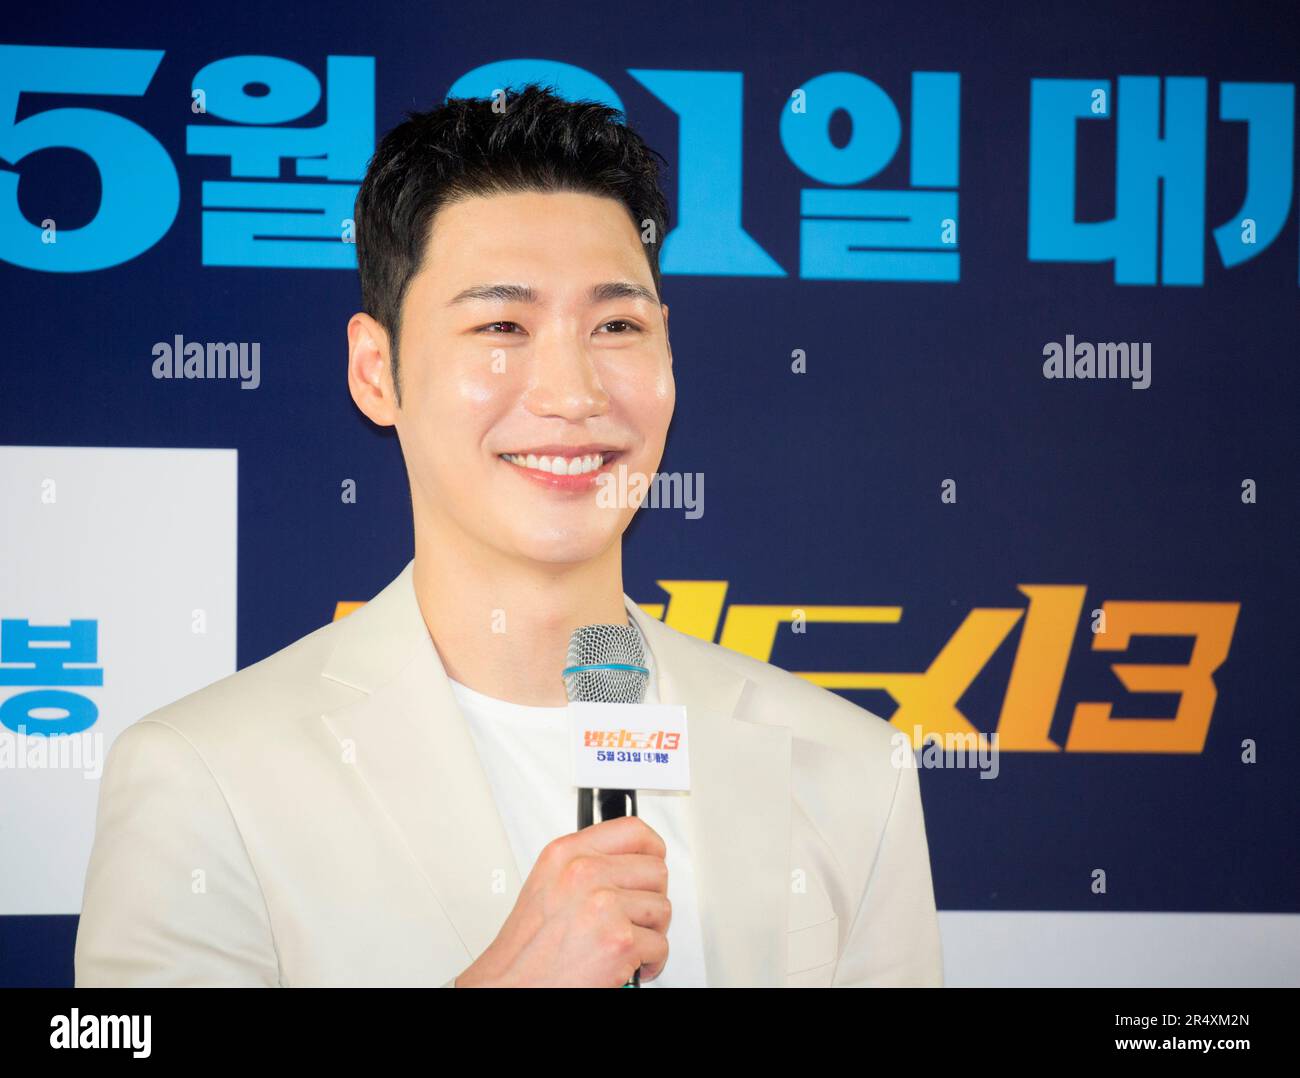 Cha Woo-Jin, May 22, 2023 : South Korean actor Cha Woo-Jin attends a photocall before a VIP preview of South Korean movie 'The Roundup: No Way Out' in Seoul, South Korea. 'The Roundup: No Way Out', the third installment of 'The Outlaws' series will hit local theaters on May 31. Credit: Lee Jae-Won/AFLO/Alamy Live News Stock Photo